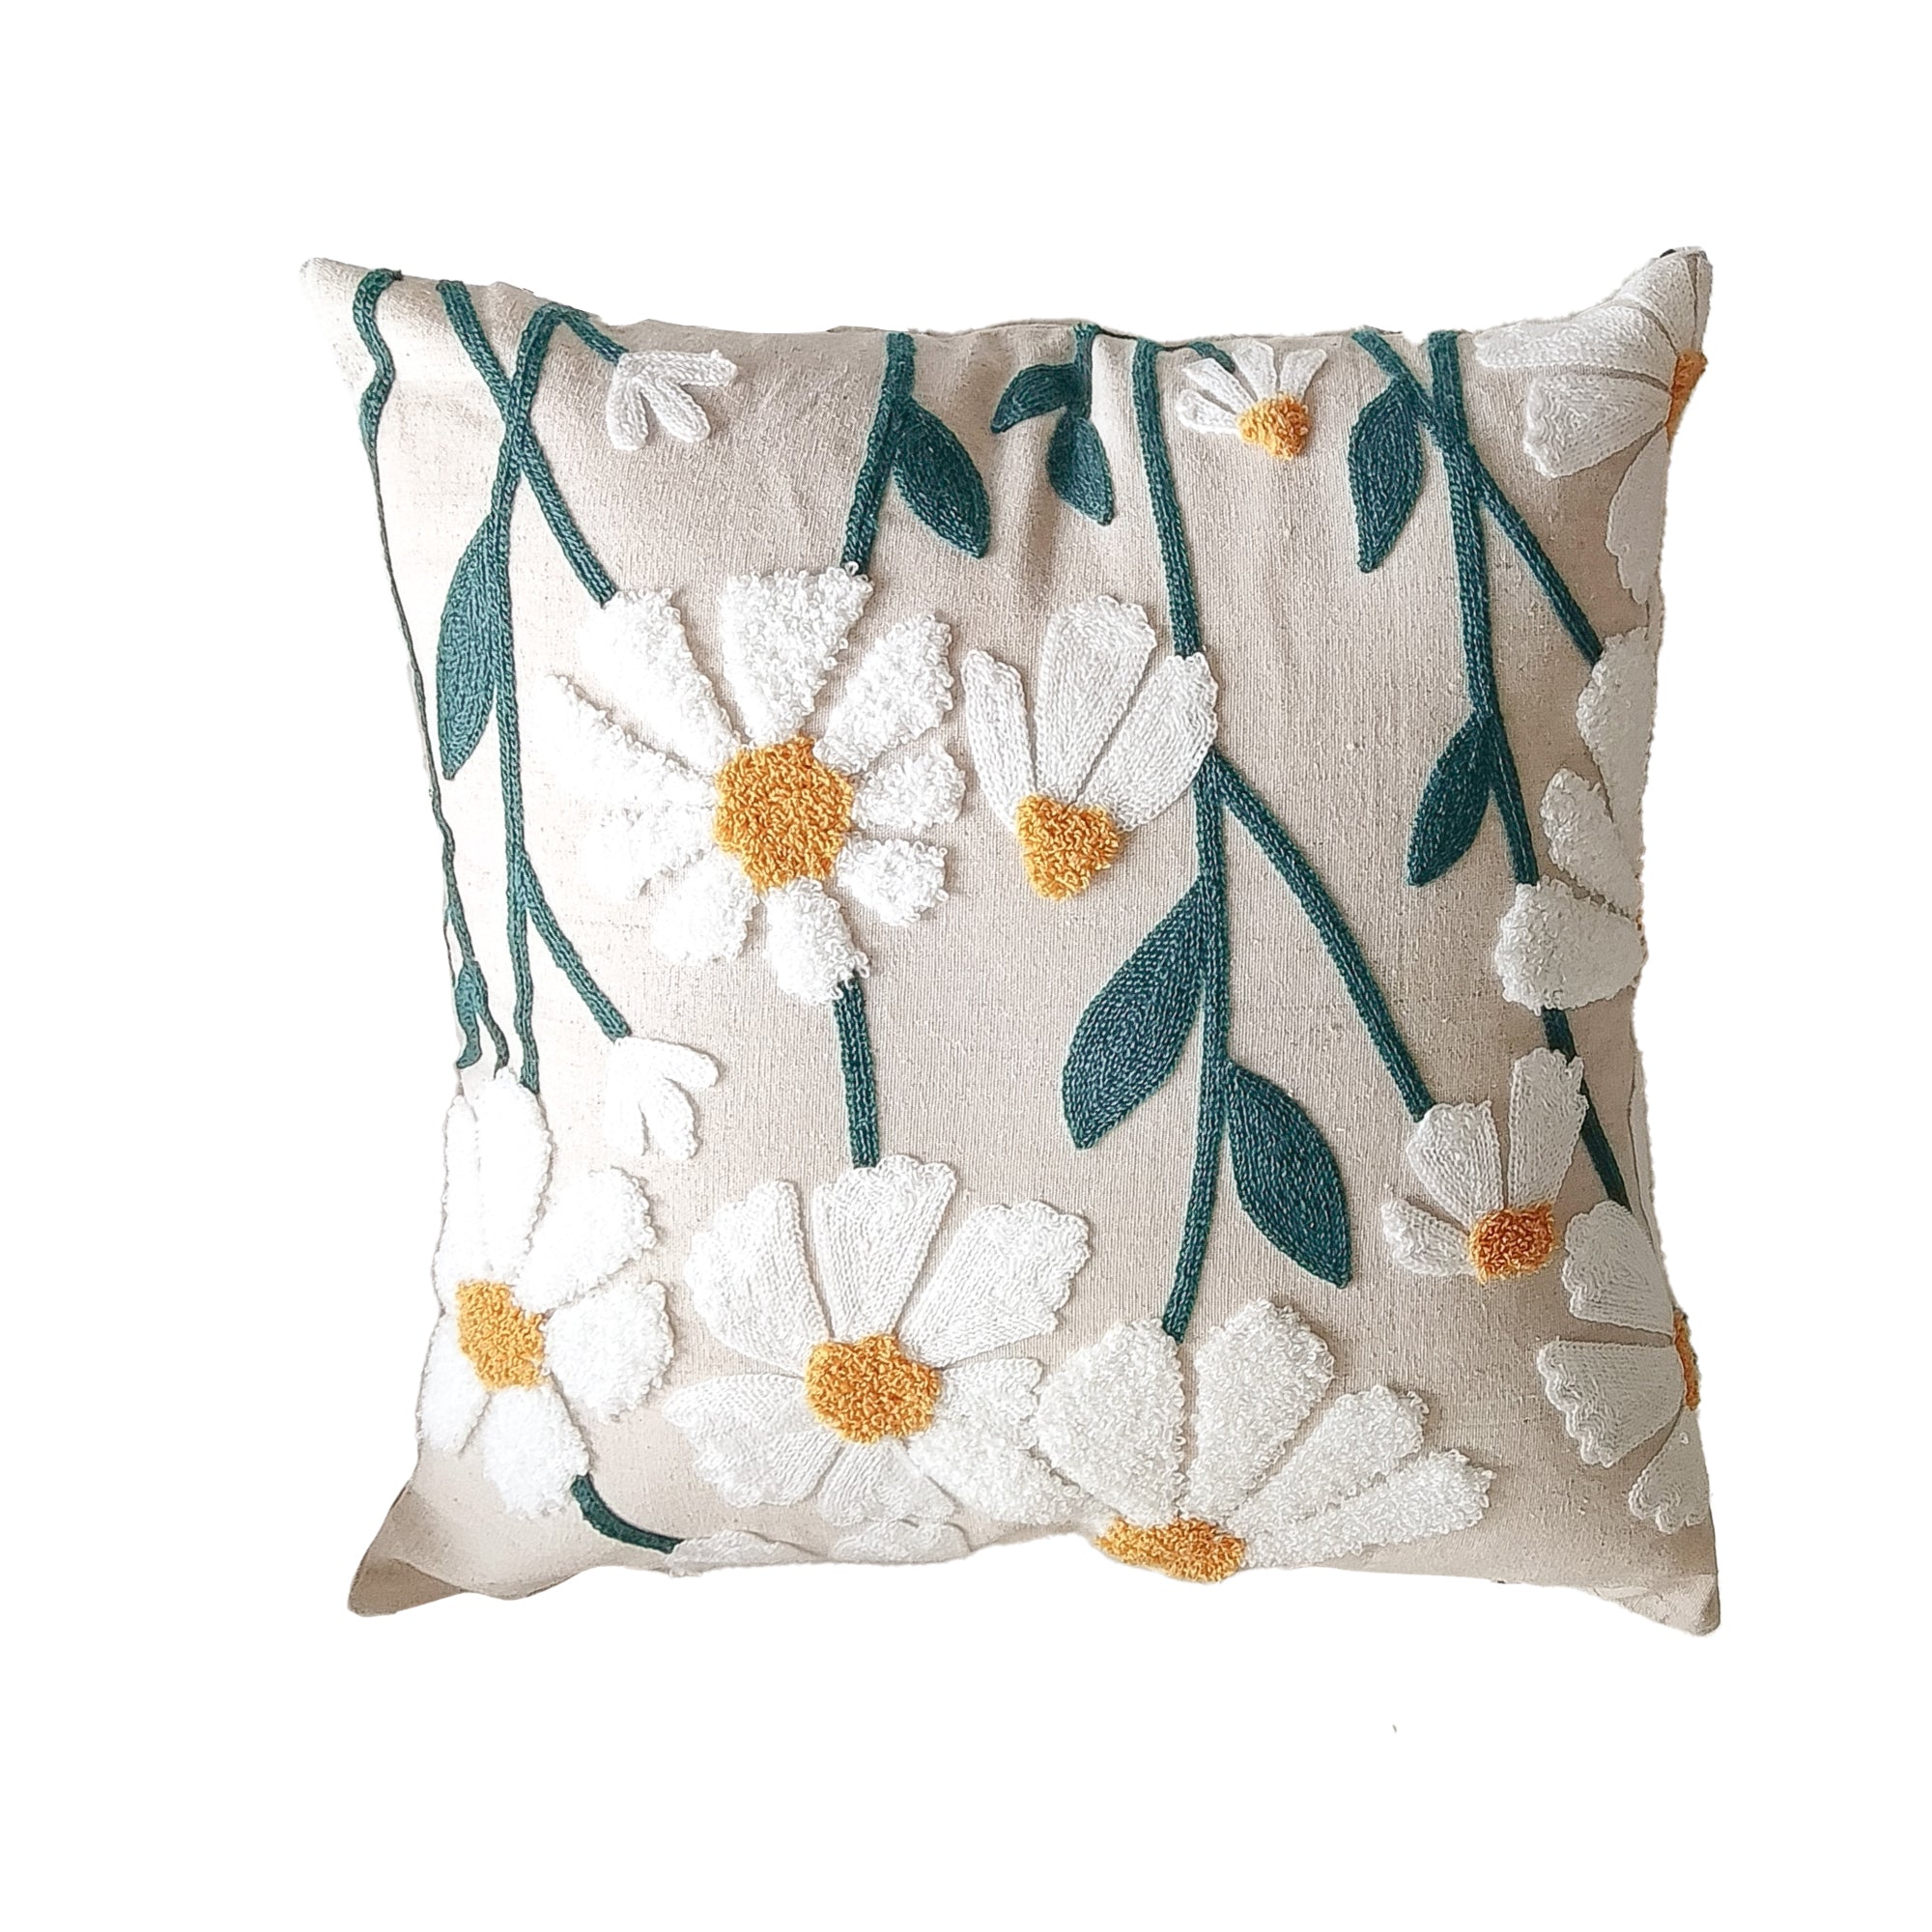 Flower Embroidered Throw Pillows Covers 18x18